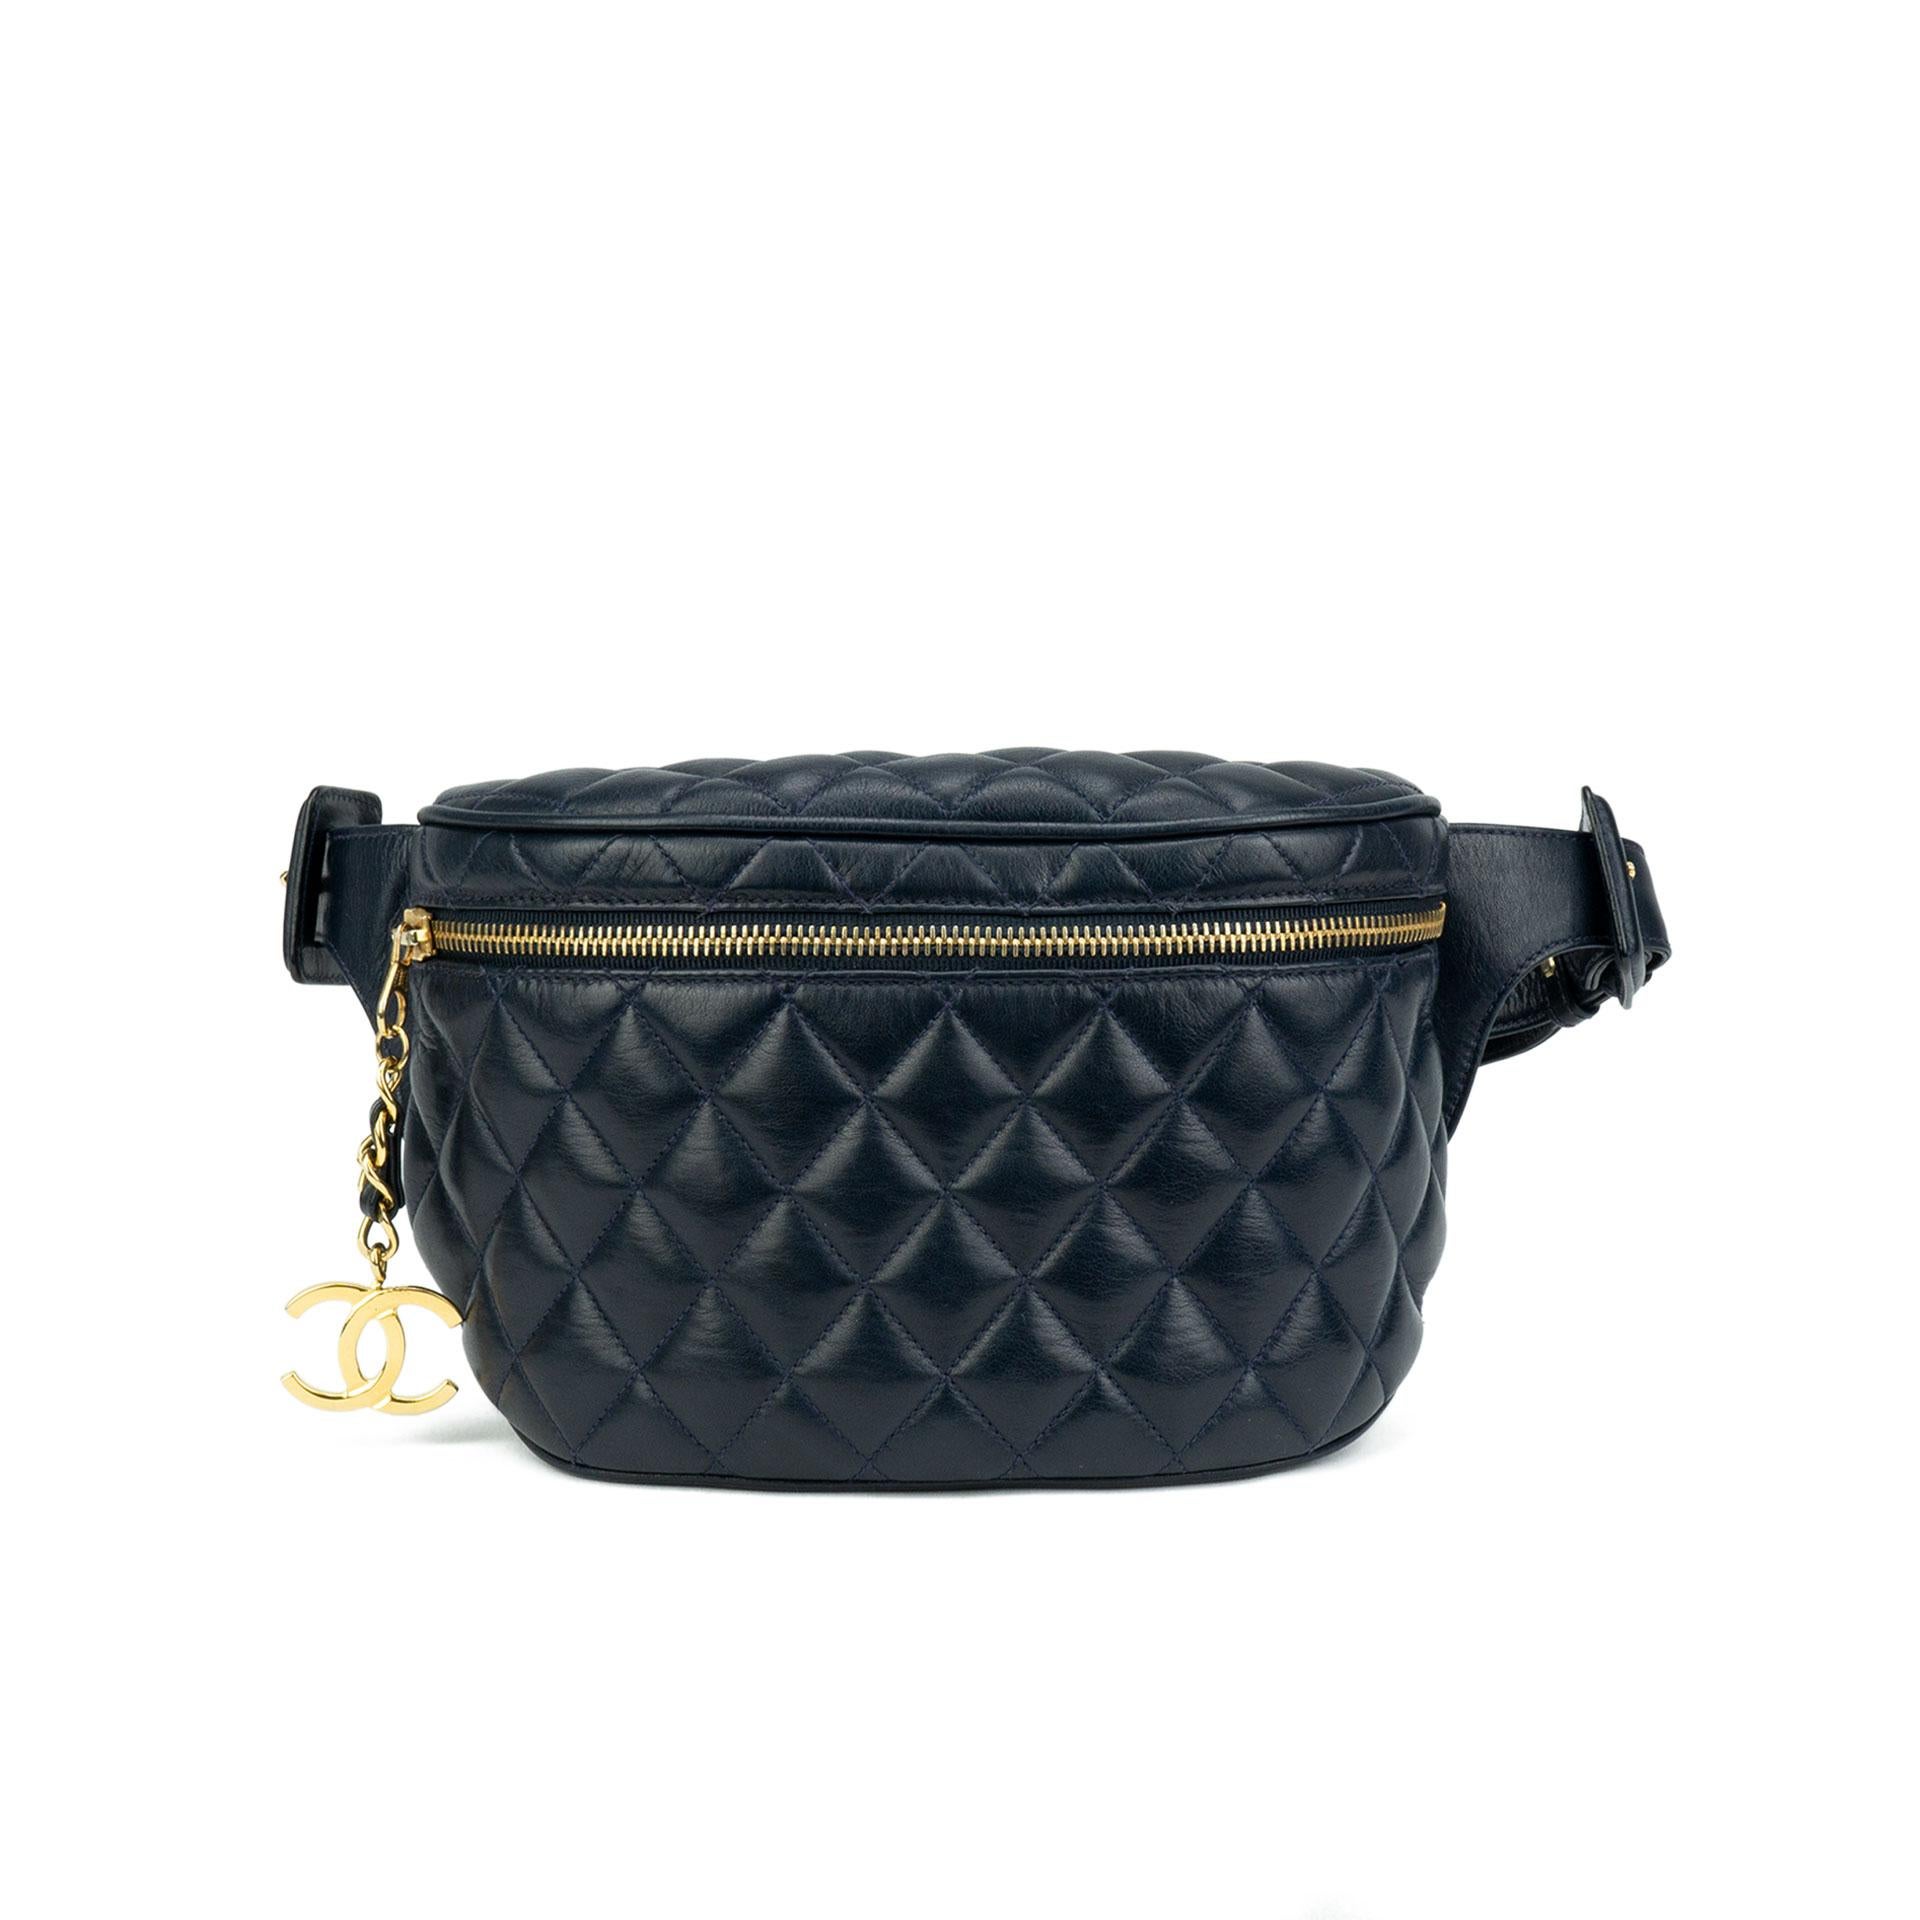 Chanel vintage quilted leather fanny pack features gold hardware.

1991 {Vintage 31 Years}
Gold Hardware
Blue quilted lambskin leather
CC logo medallion charm 
Zippered closure
Waist size is 75 cm / 30